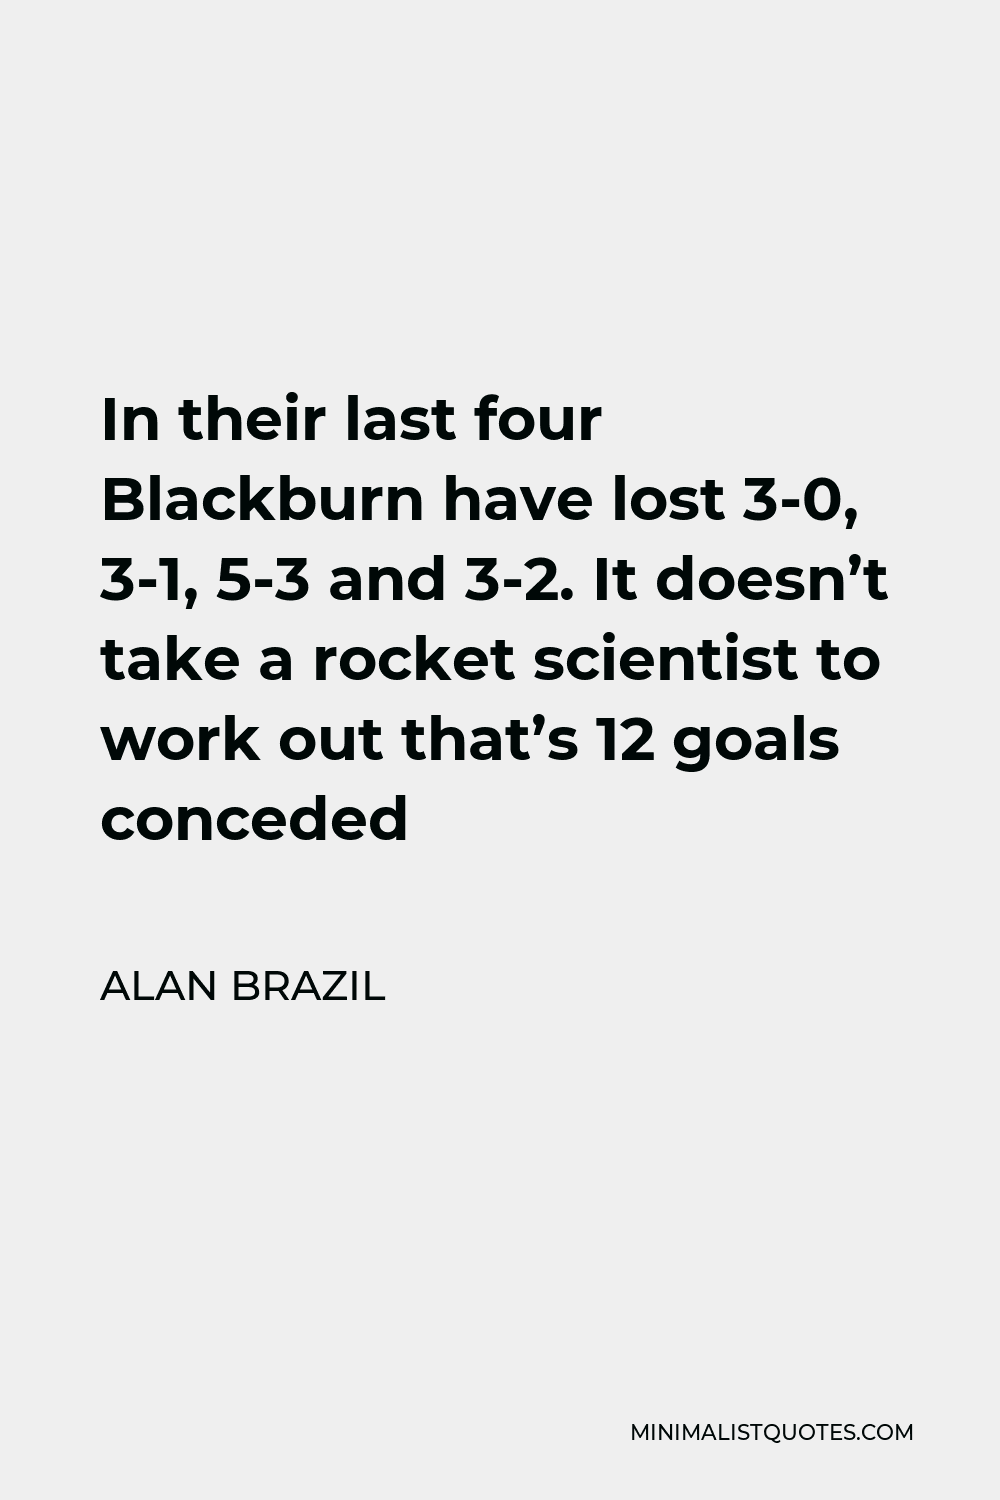 Alan Brazil Quote - In their last four Blackburn have lost 3-0, 3-1, 5-3 and 3-2. It doesn’t take a rocket scientist to work out that’s 12 goals conceded